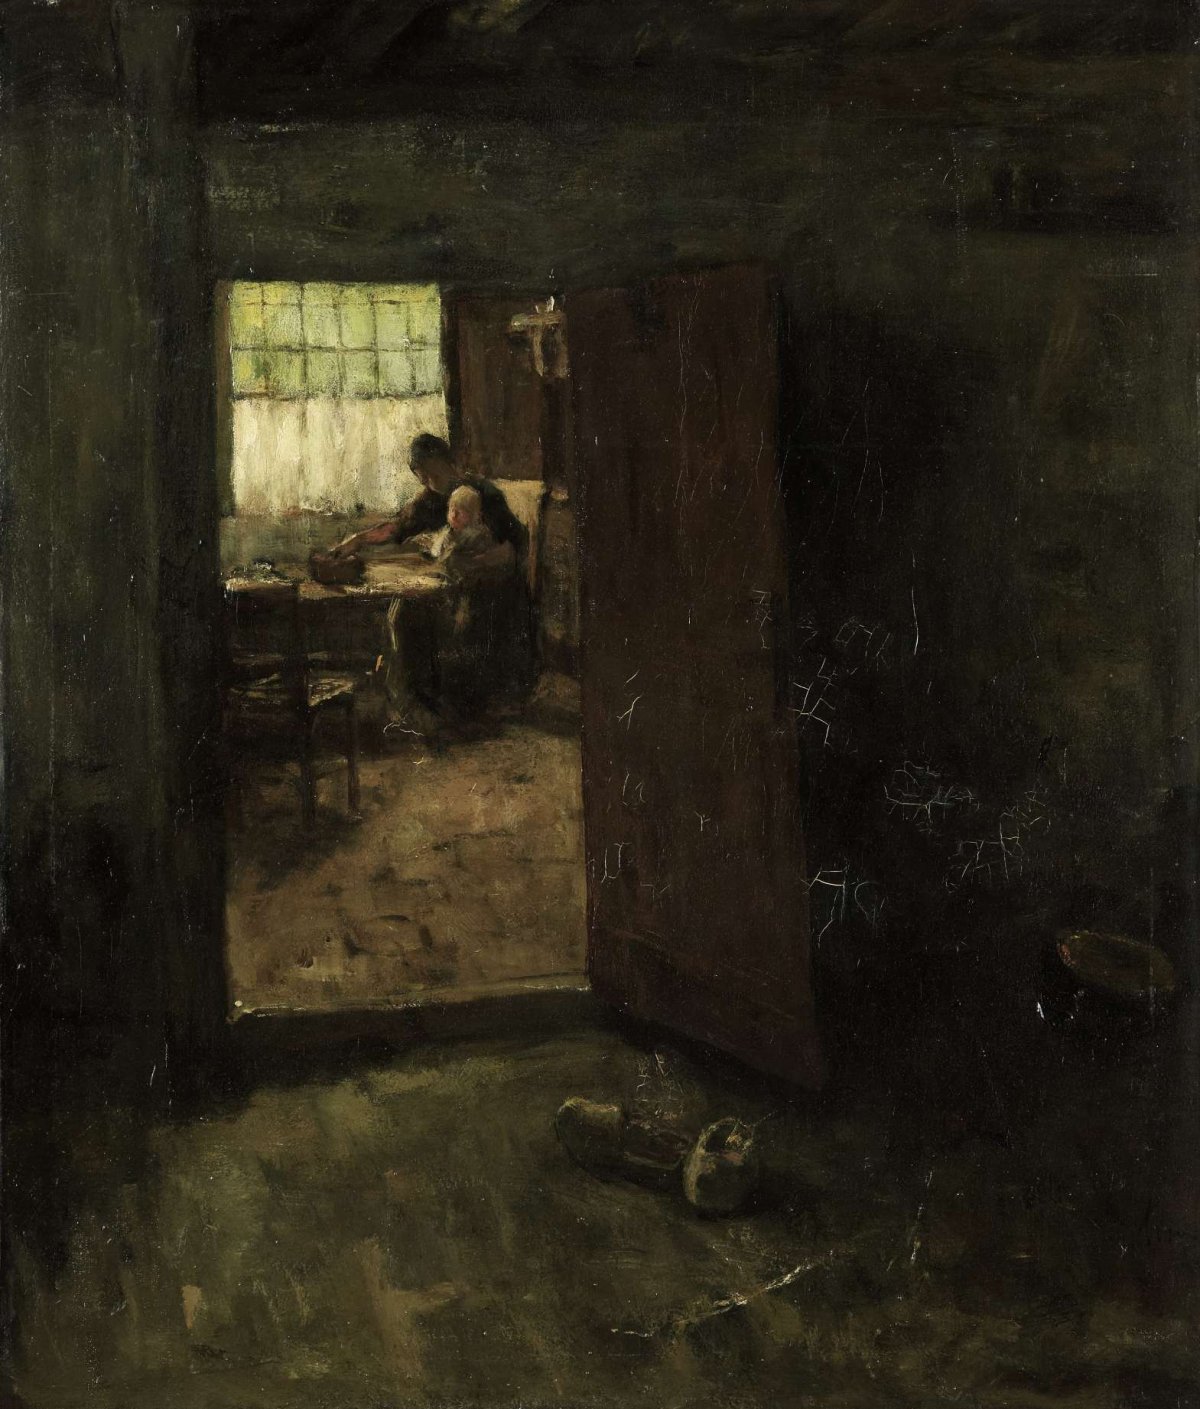 Domestic Interior with Country Woman and Child, Jacob Simon Hendrik Kever, c. 1880 - c. 1907